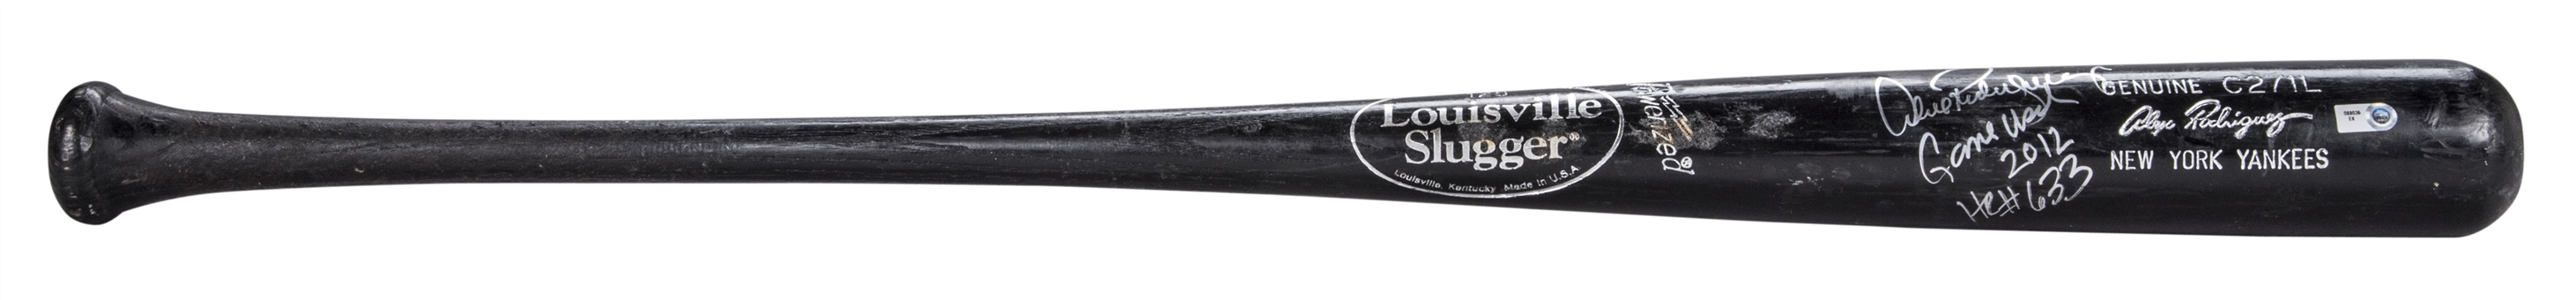 2012 Alex Rodriguez Game Used and Signed Louisville C271L Bat for Career HR #633 (PSA/DNA GU 10 & MLB Auth)